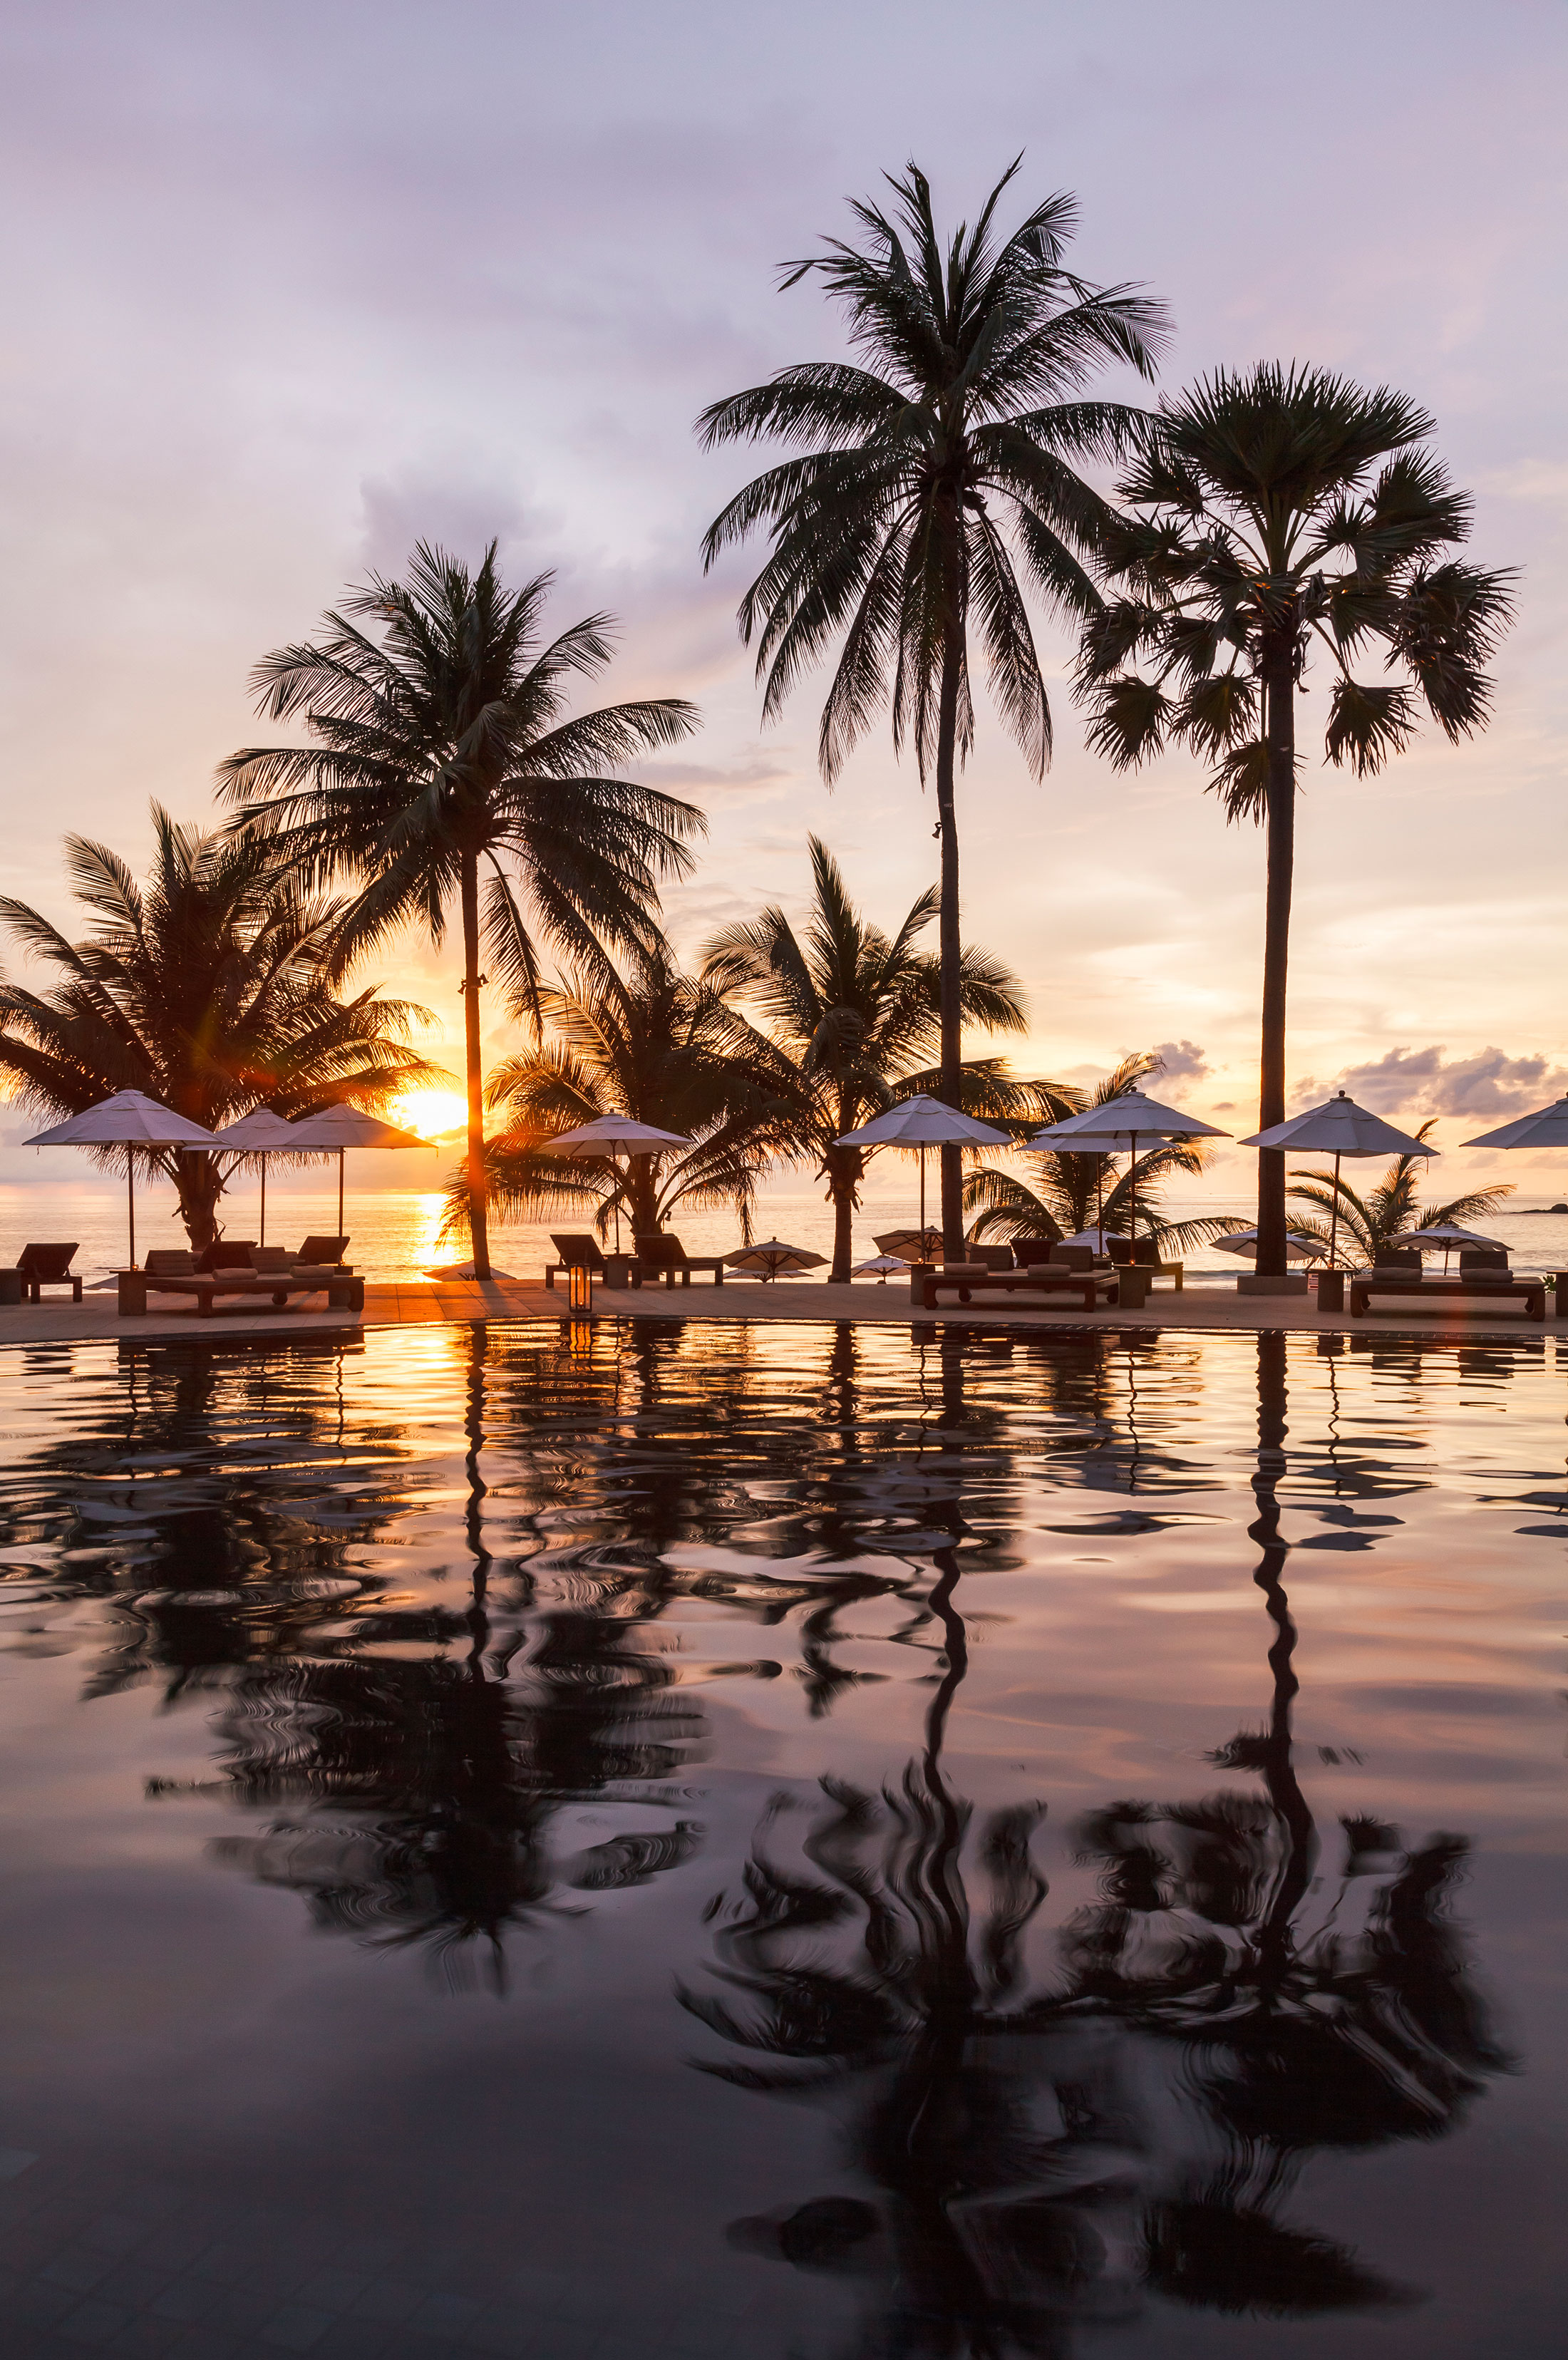 The Surin Phuket, Win a free holiday with design hotels